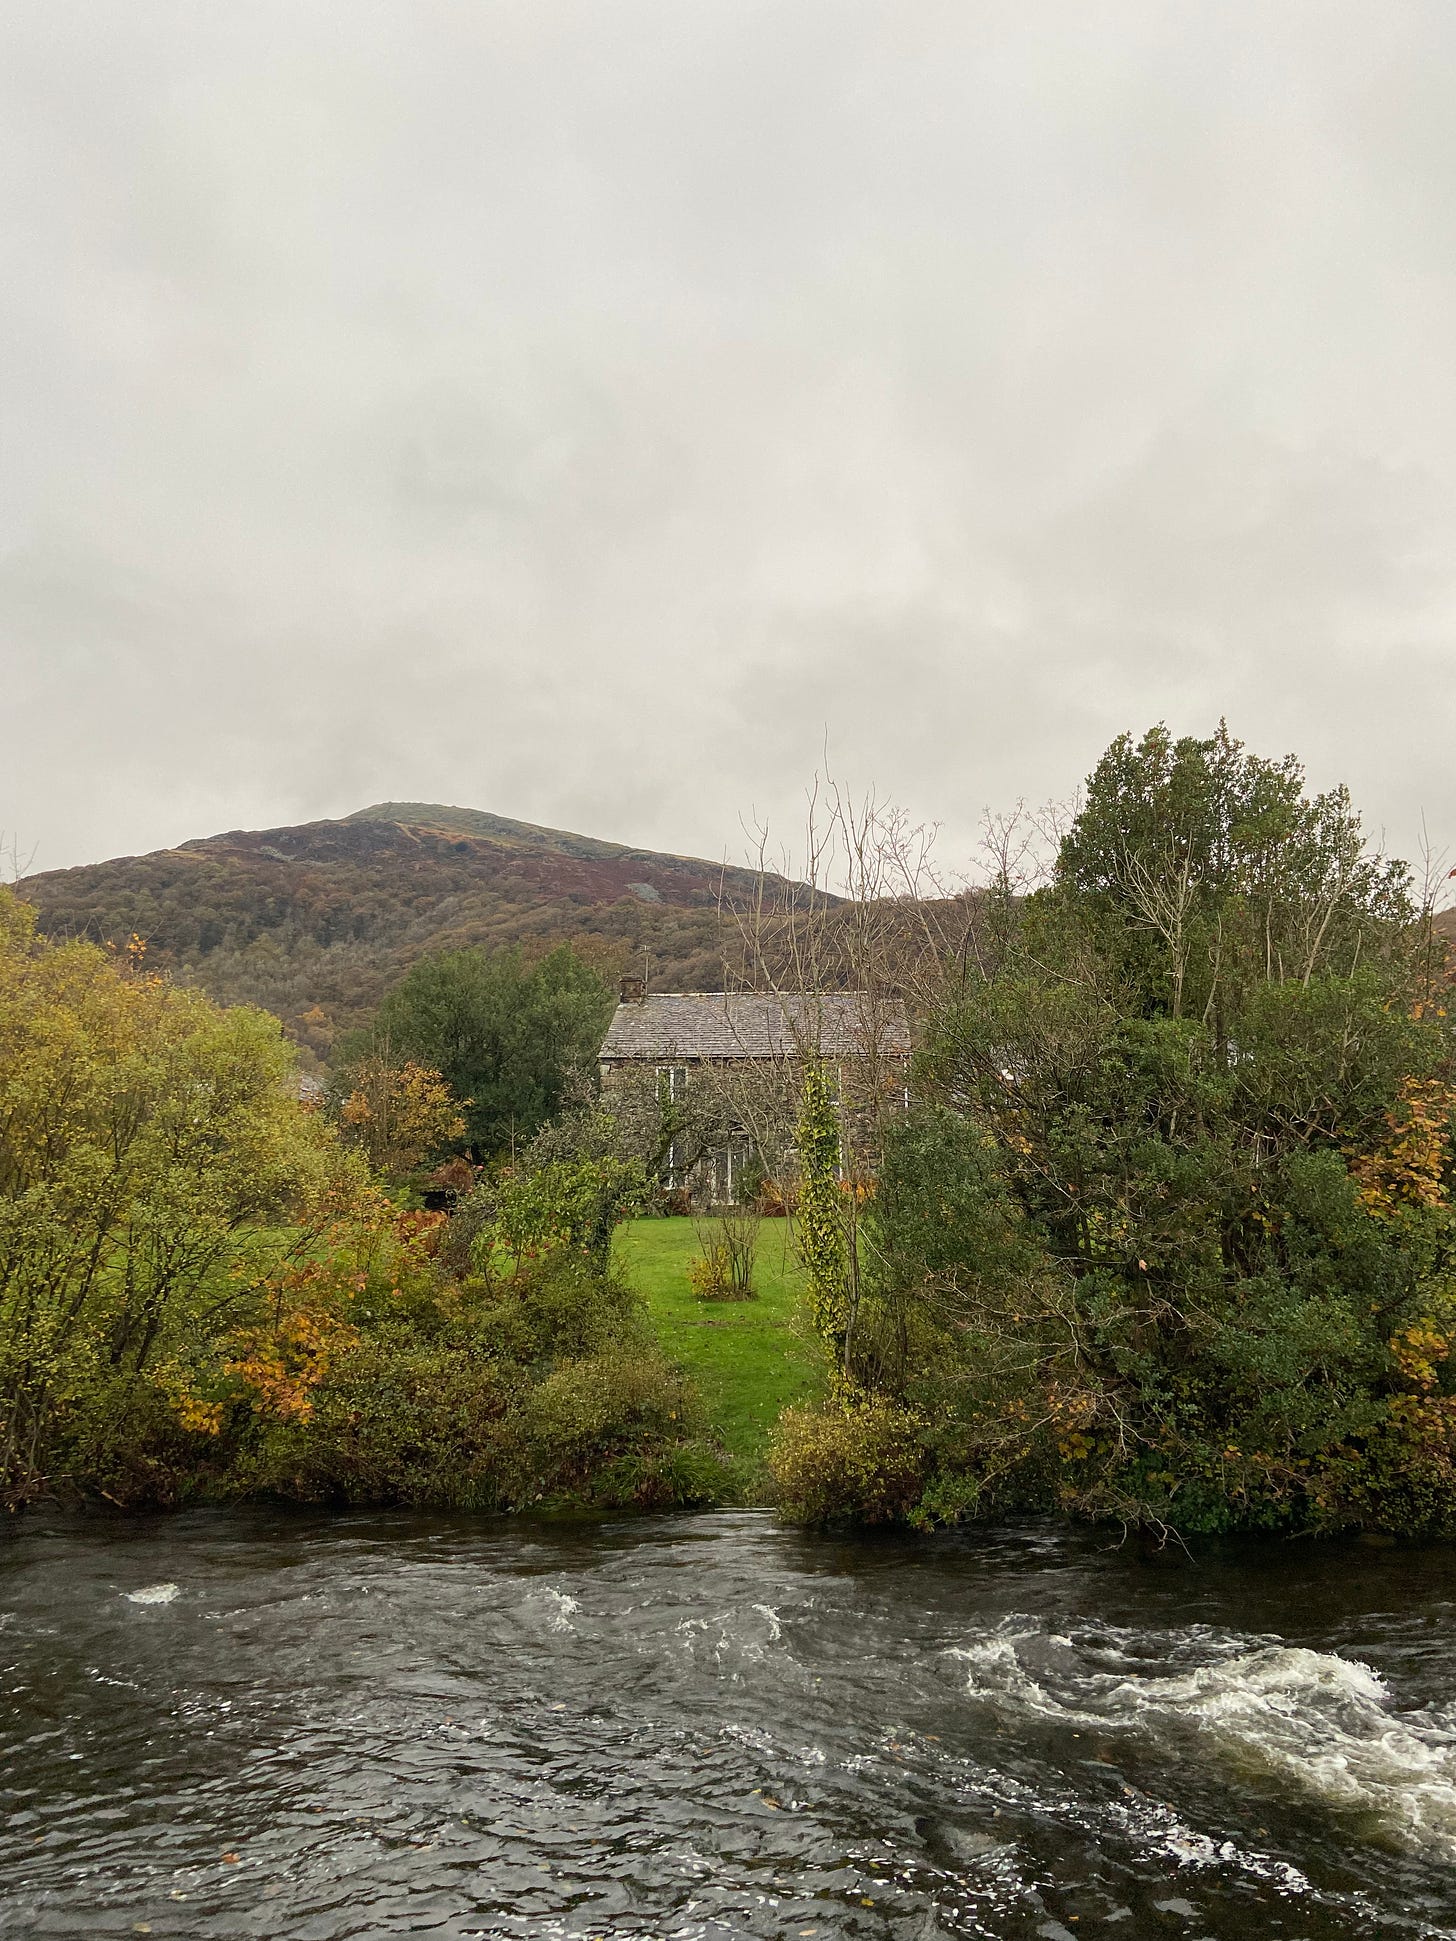 A stone cottage on the edge of the River Duddon, surrounded by trees and a lawn. In the background, behind the house, there's a mountain covered in trees and heather. 